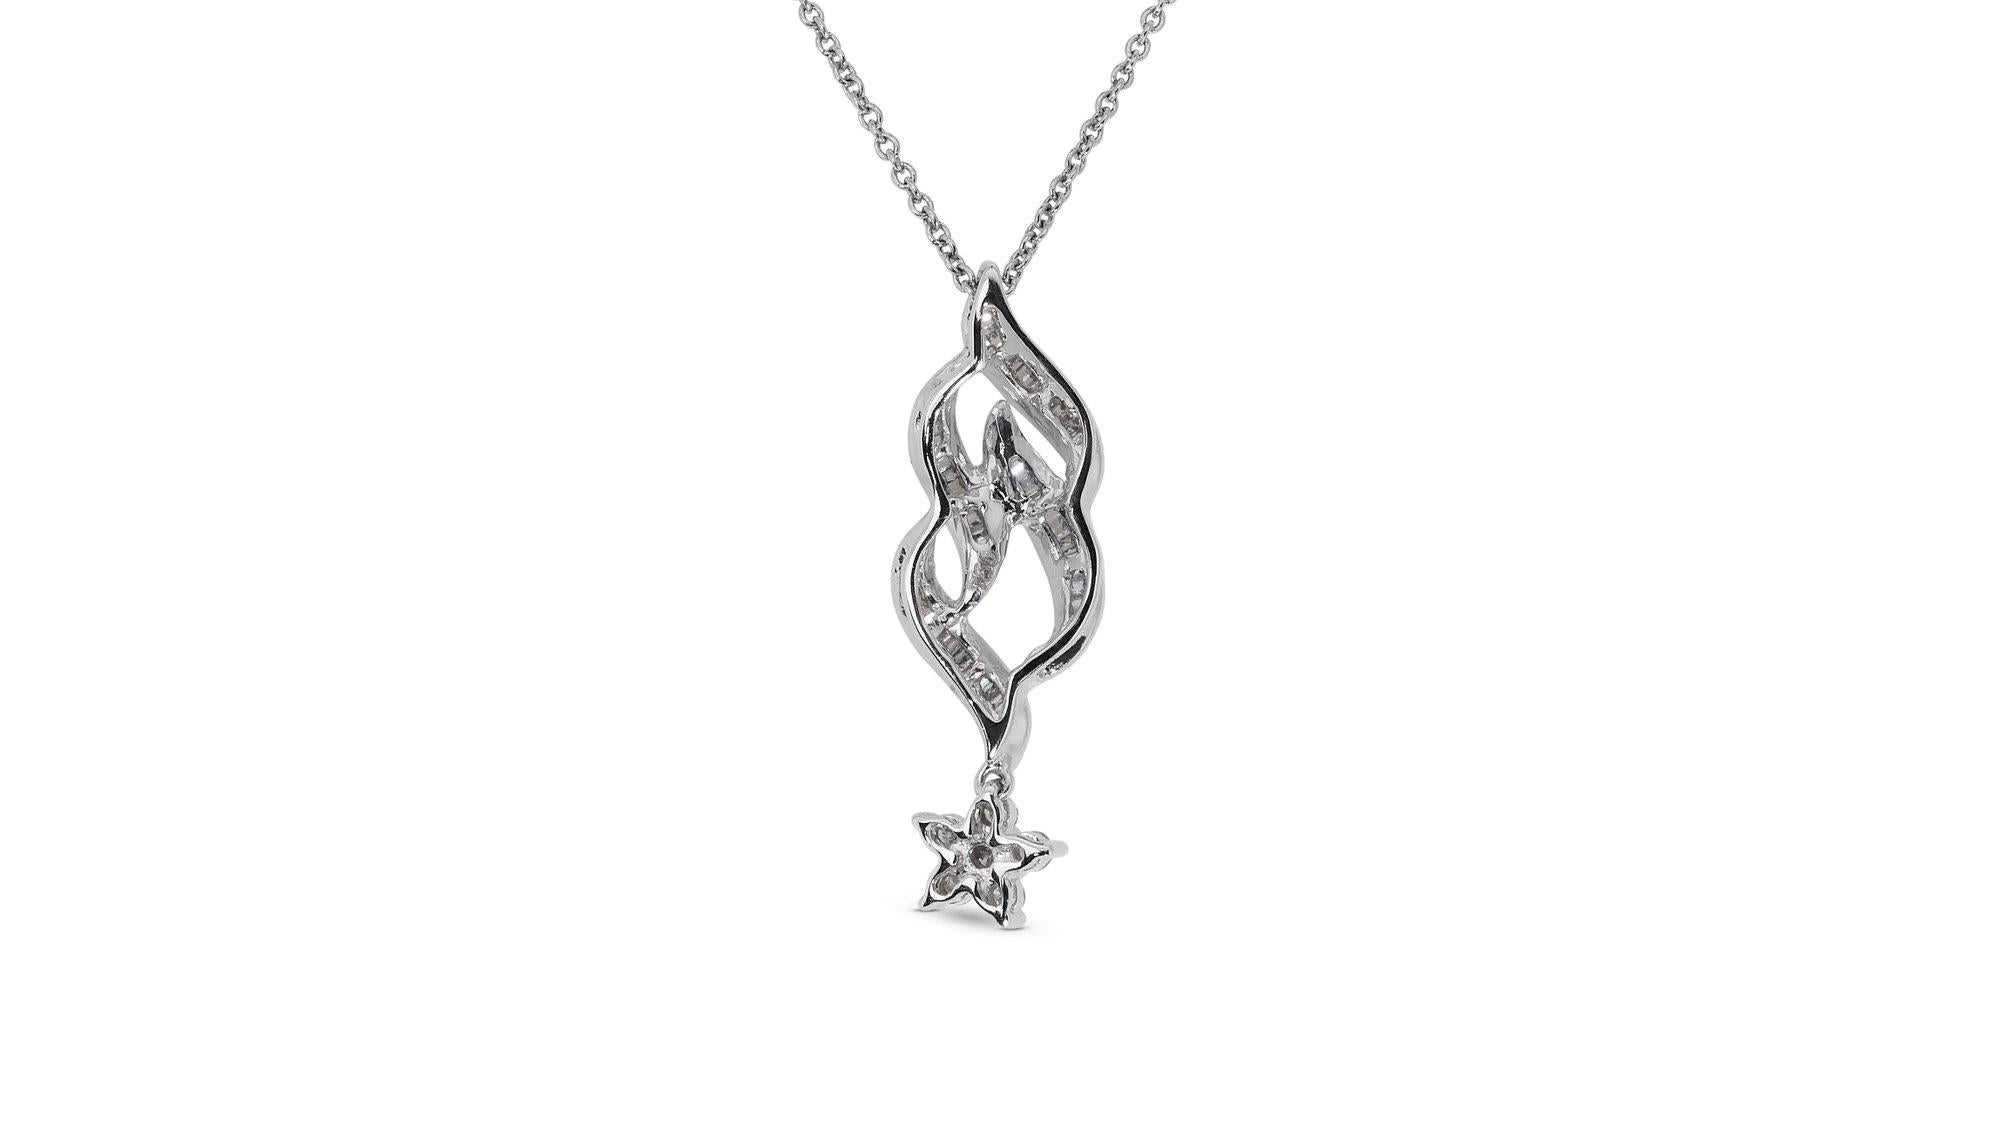 Tapered Baguette Dazzling 18K White Gold Necklace w/ 0.7 ct Natural Diamonds AIG Certificate